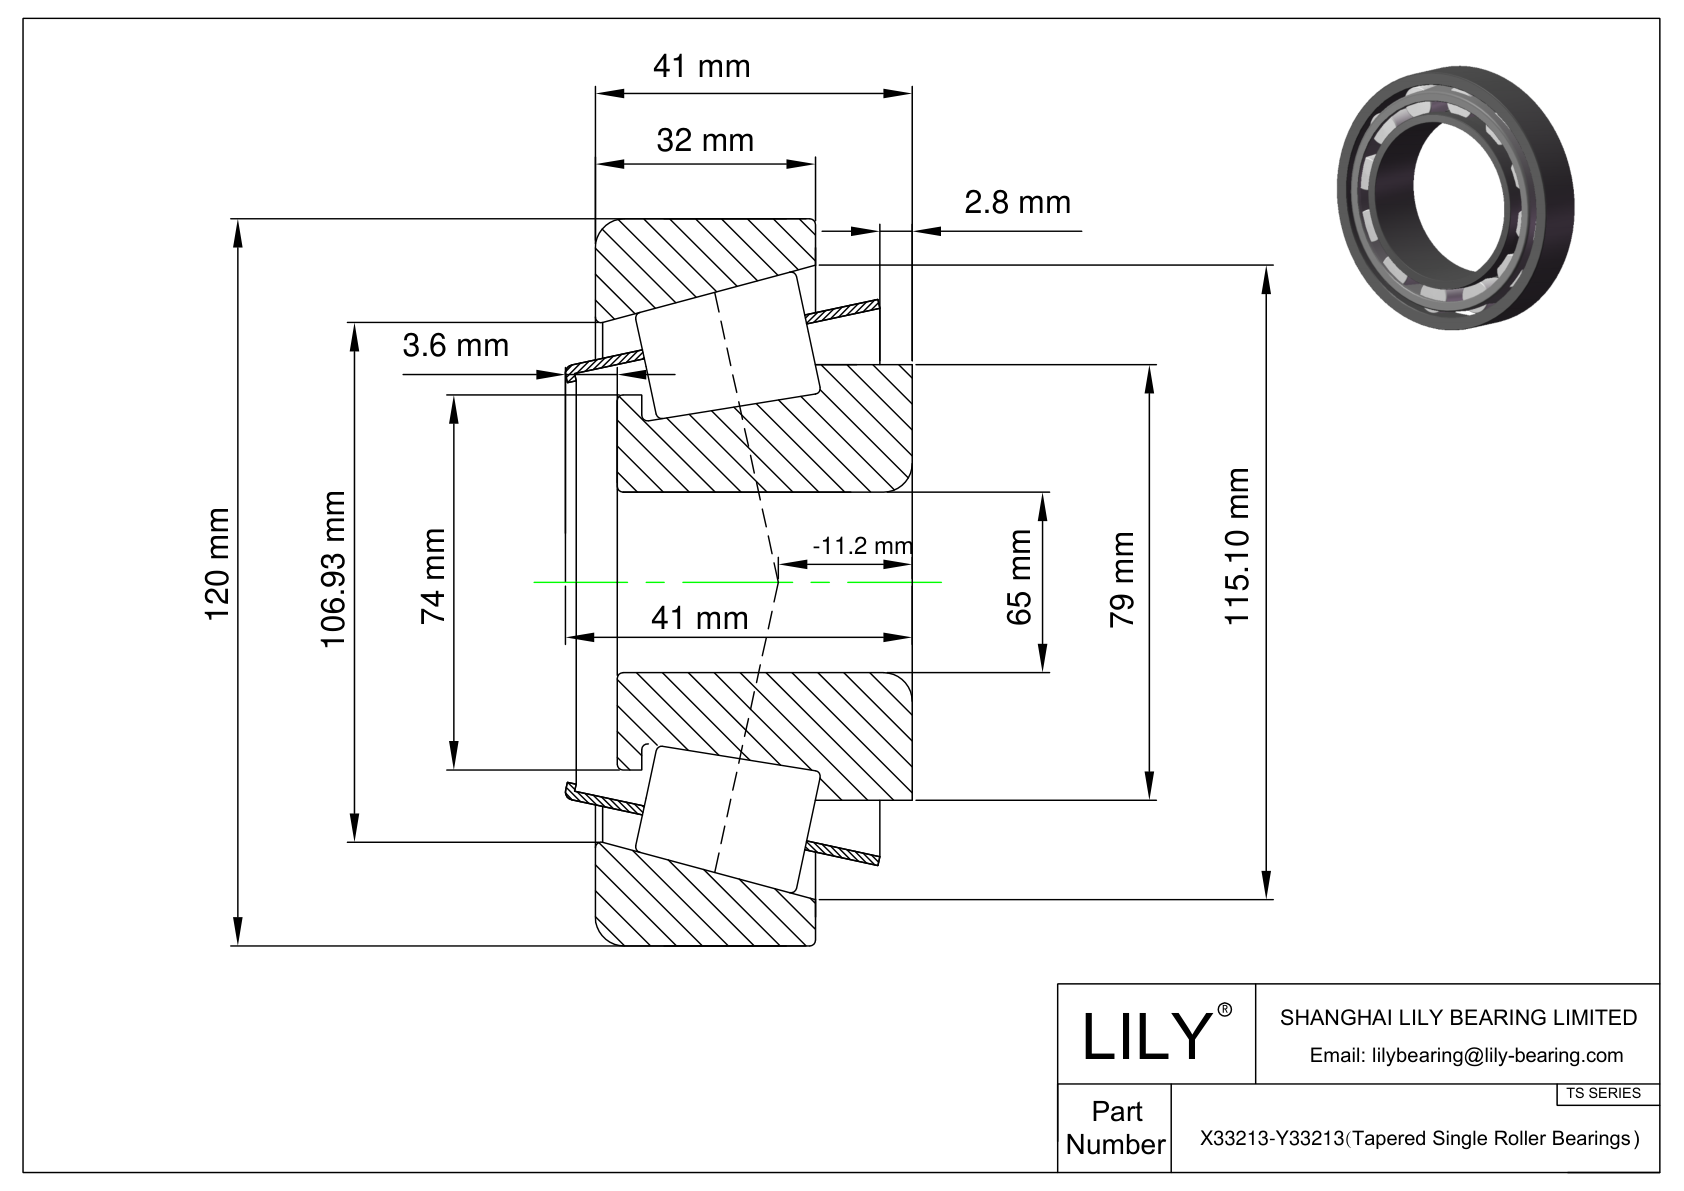 X33213-Y33213 TS (Tapered Single Roller Bearings) (Metric) cad drawing